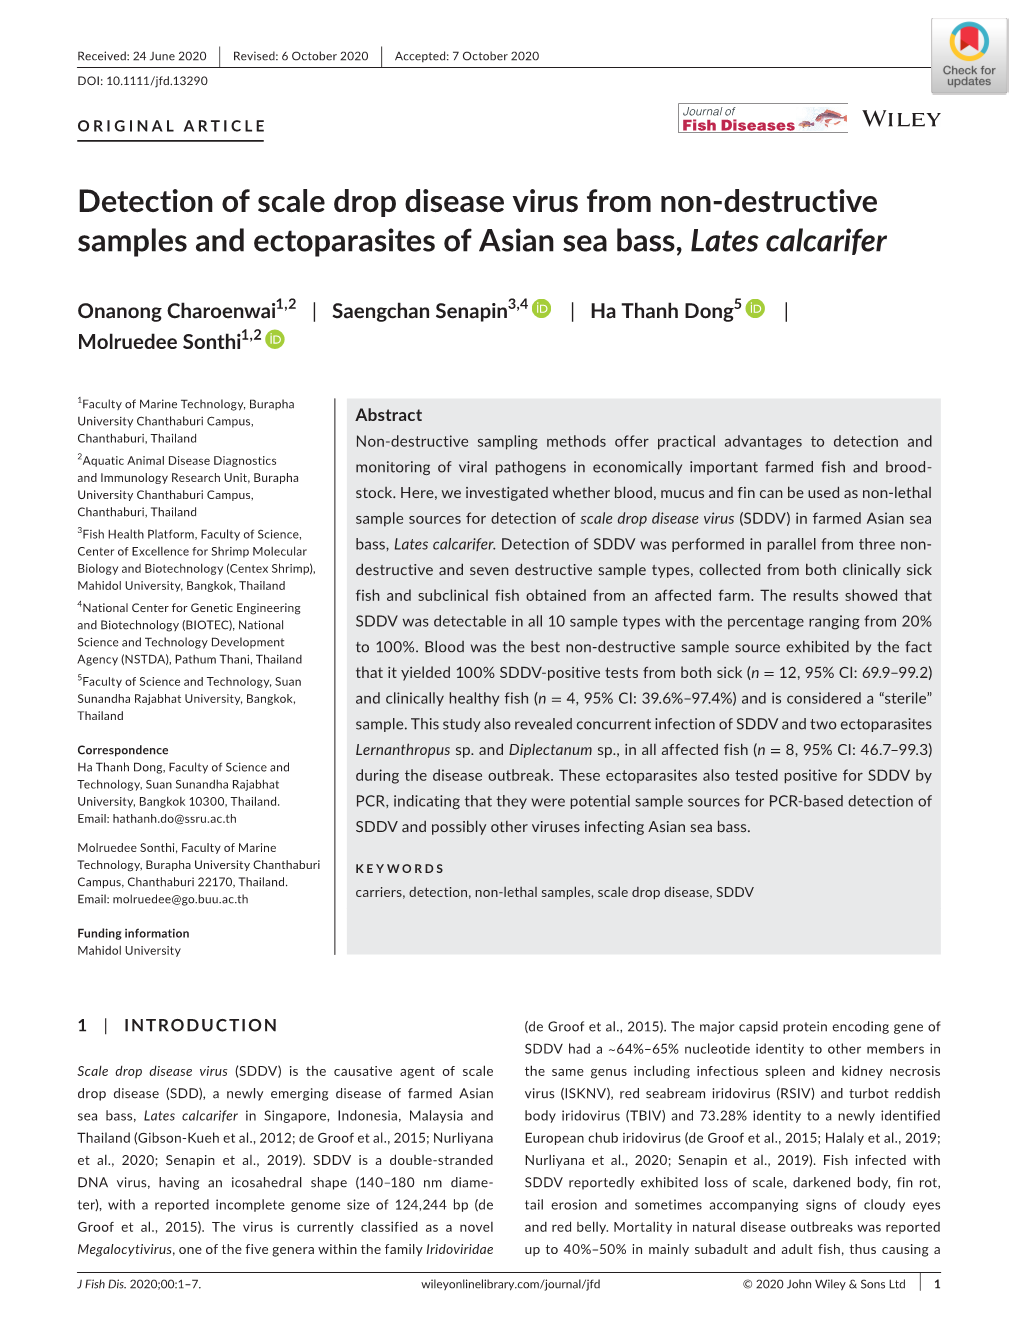 Detection of Scale Drop Disease Virus from Non‐Destructive Samples and Ectoparasites of Asian Sea Bass, Lates Calcarifer